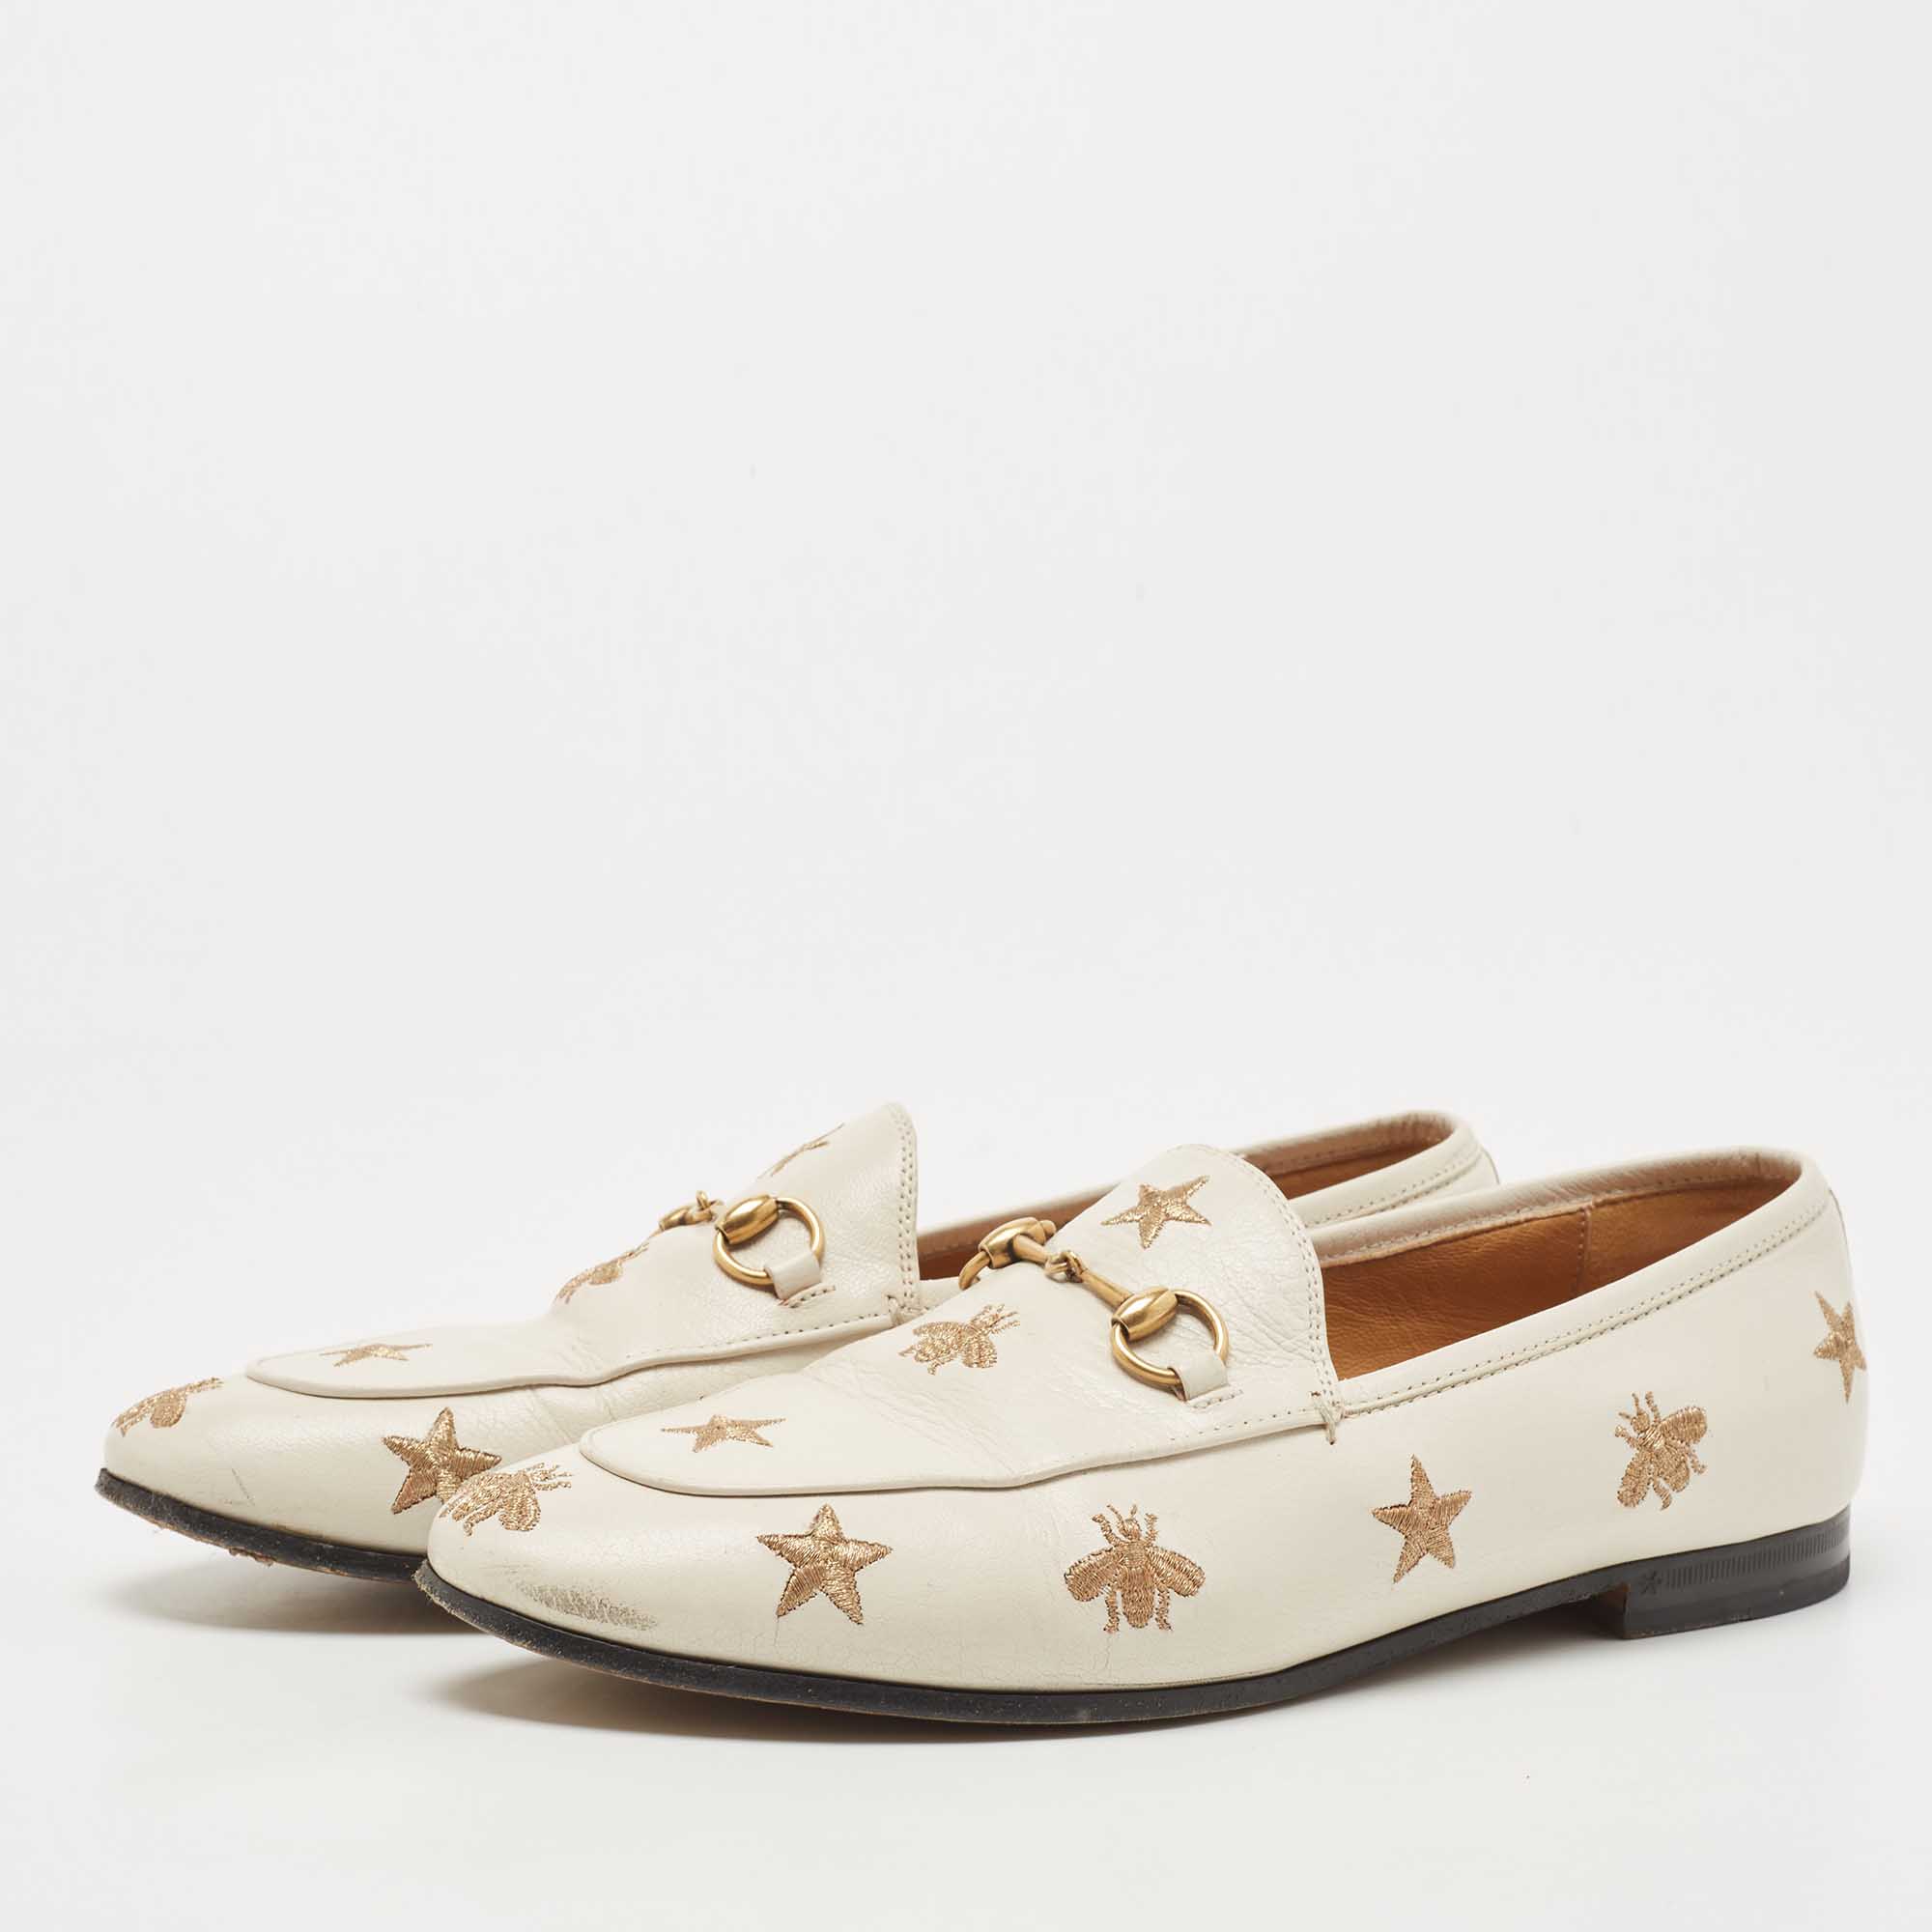 

Gucci Cream Leather Jordaan Embroidered Bee Horsebit Slip On Loafers Size